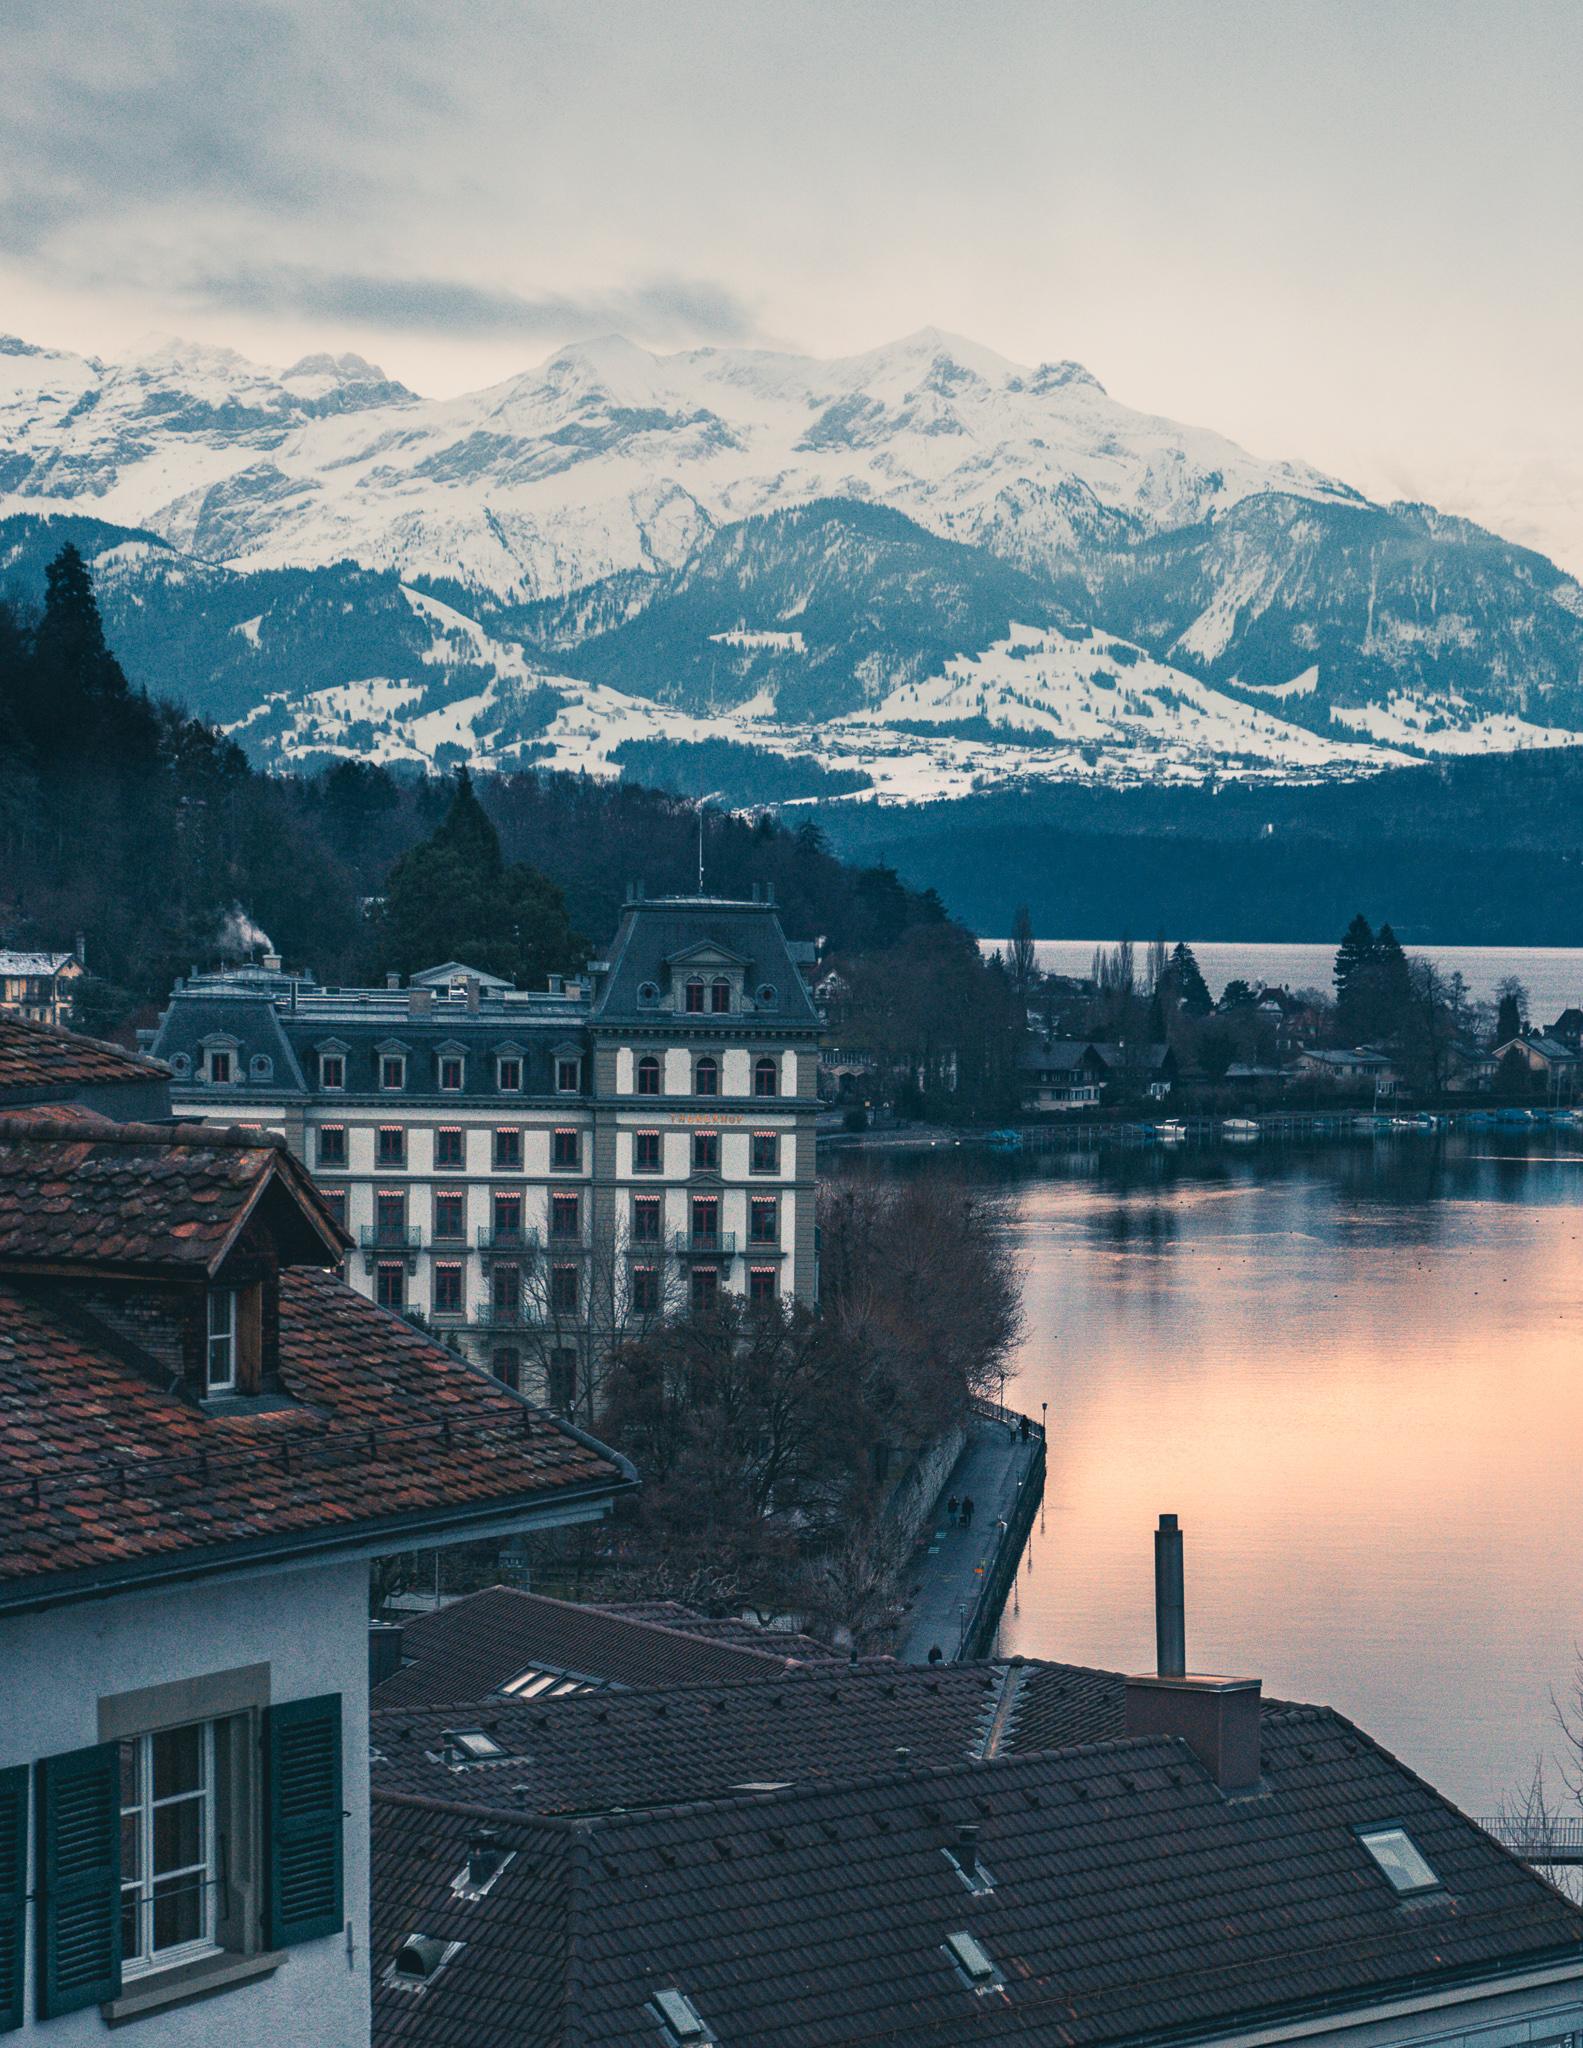 A hotel next to Thun lake in front of Swiss mountains covered in snow